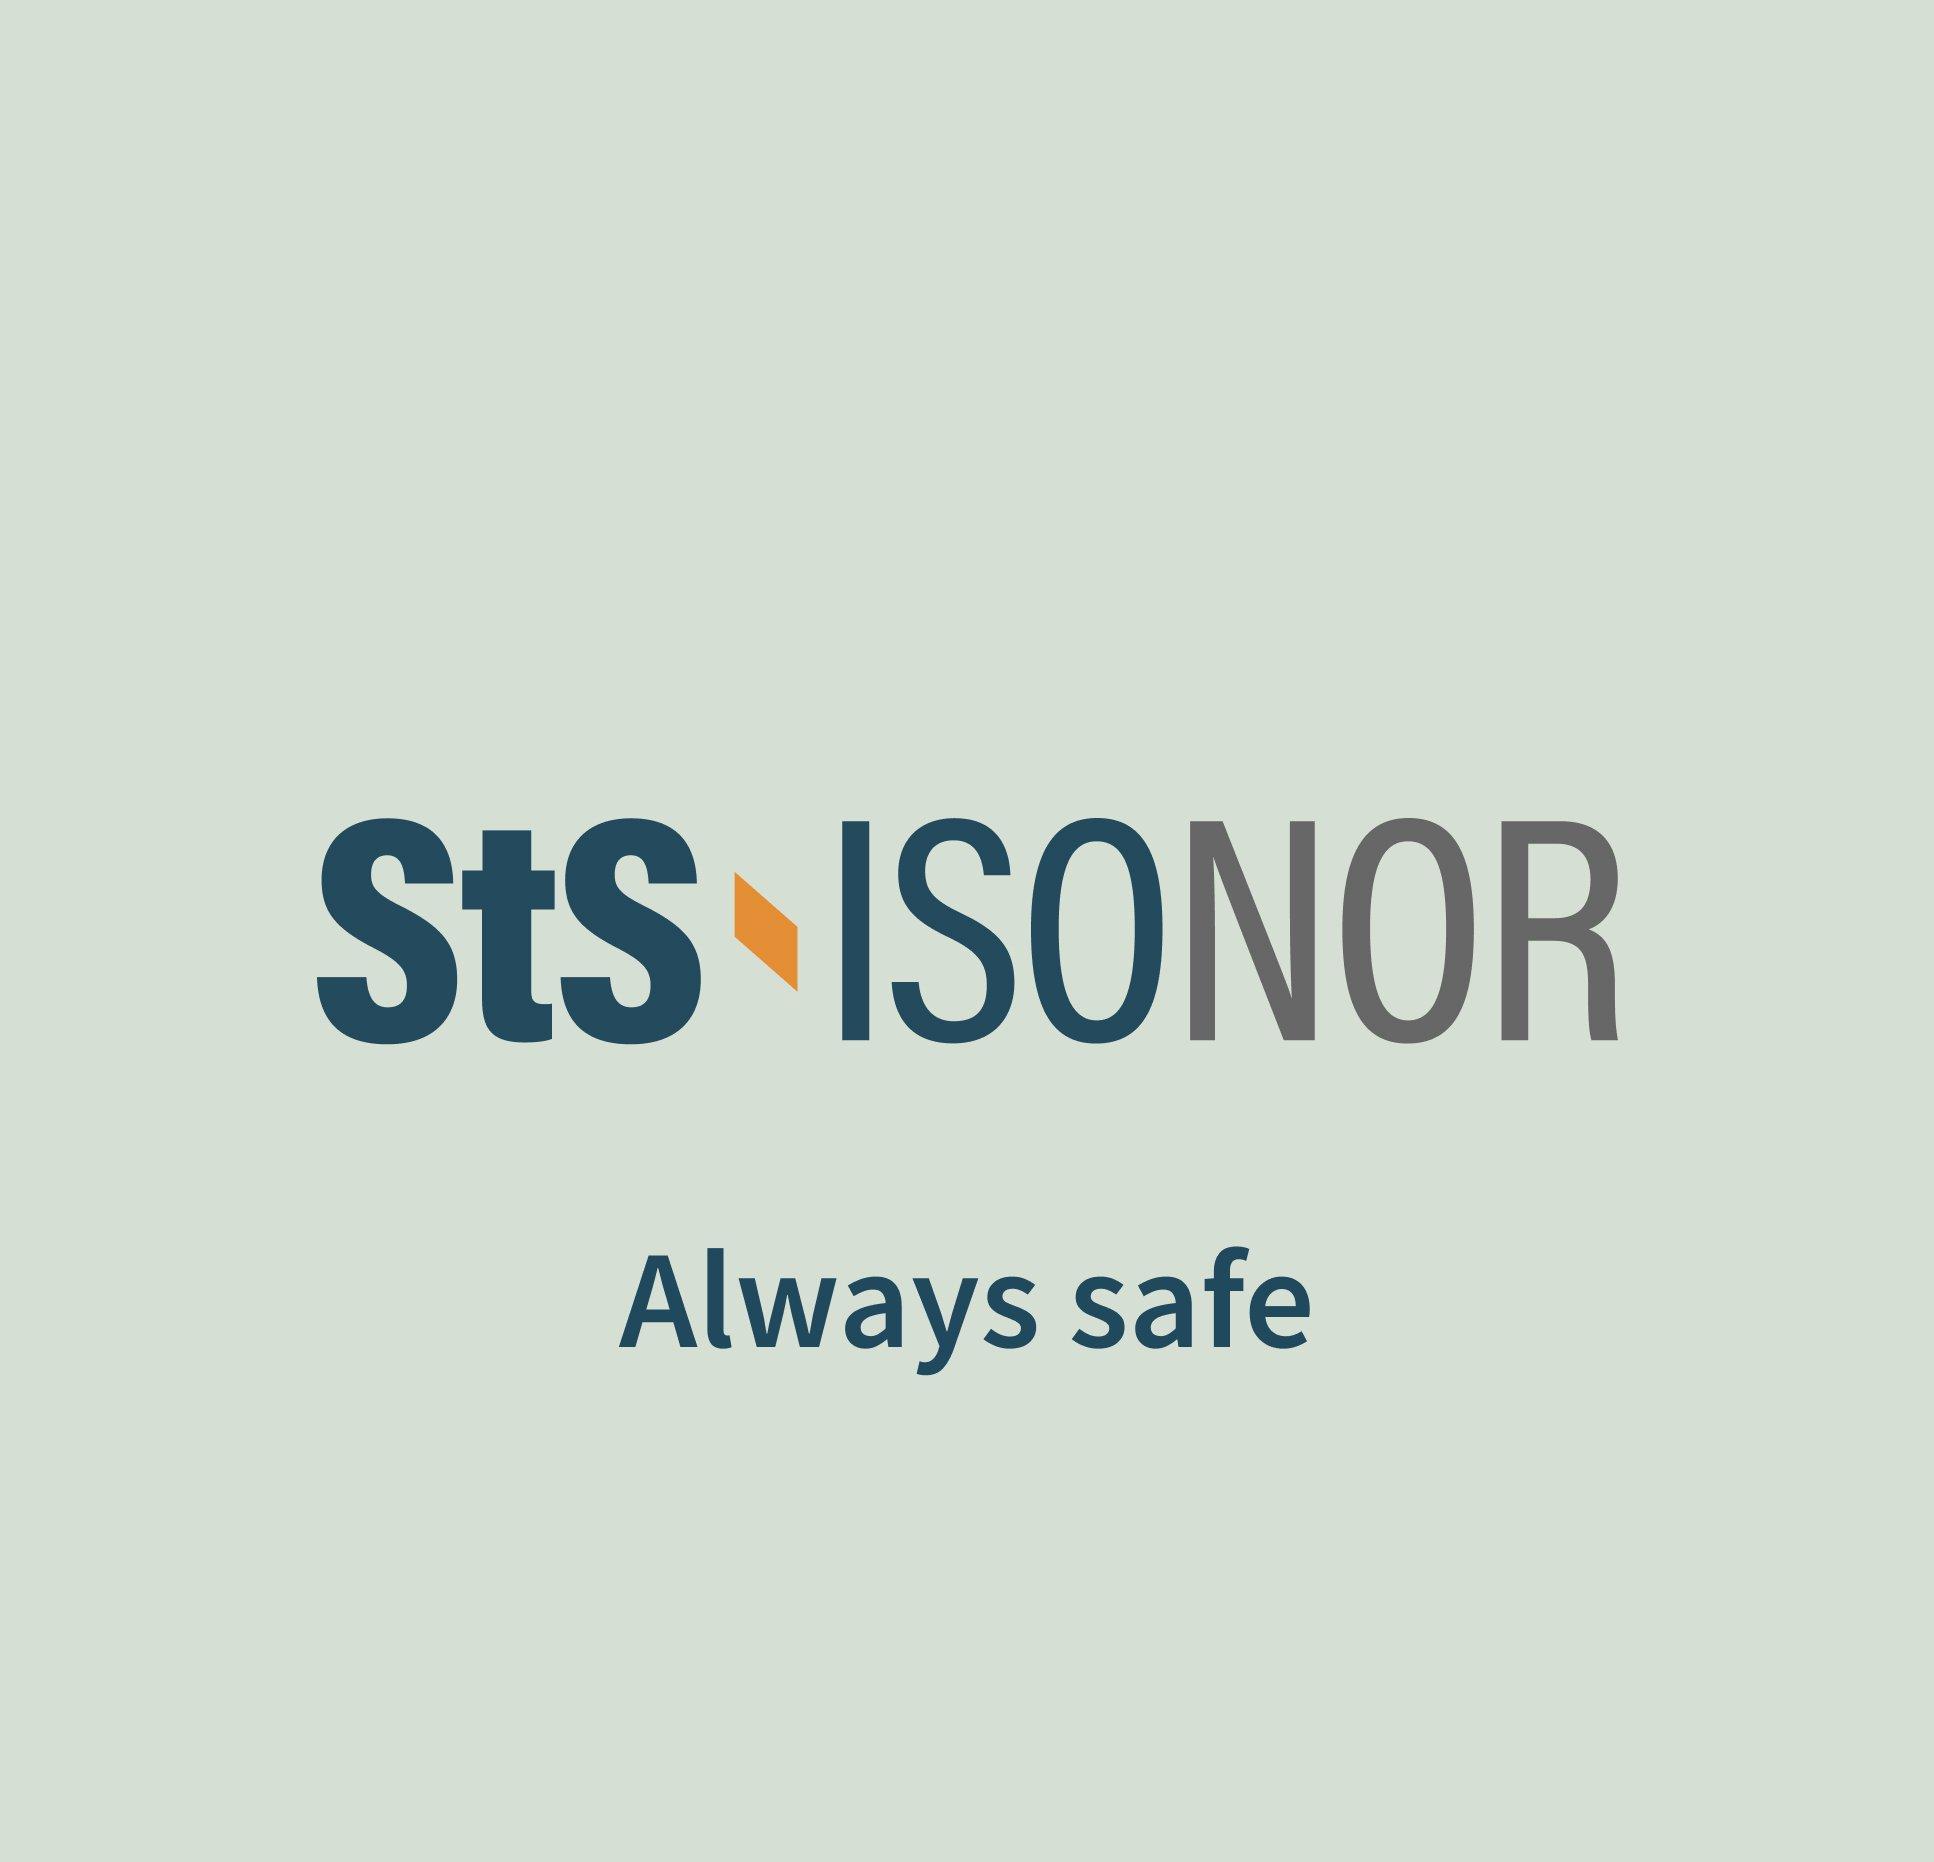 Logo and always safe cover